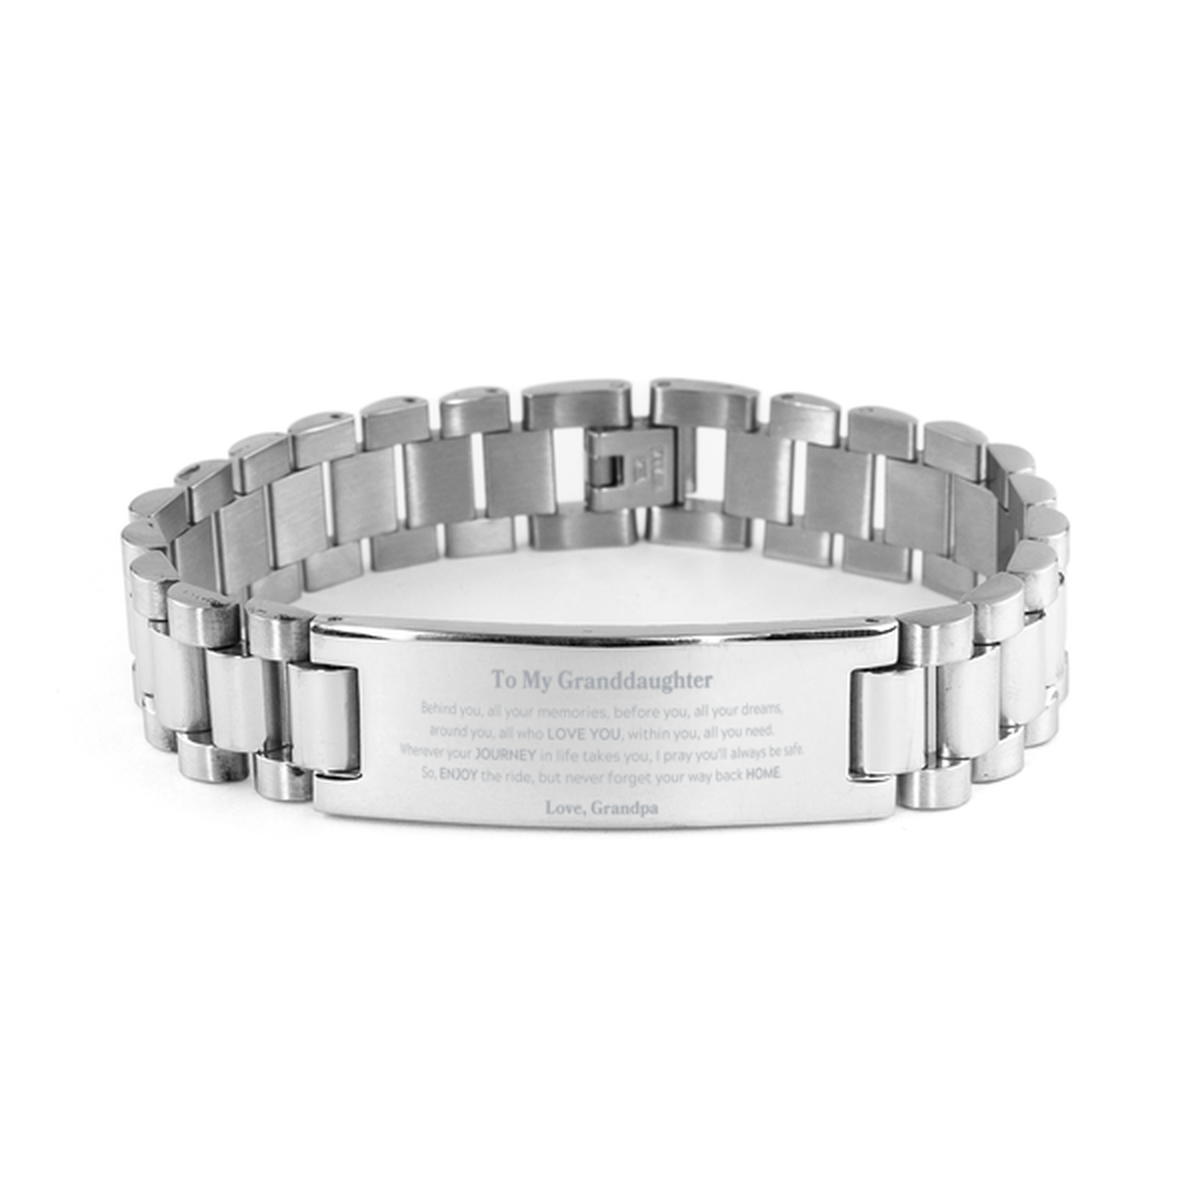 To My Granddaughter Graduation Gifts from Grandpa, Granddaughter Ladder Stainless Steel Bracelet Christmas Birthday Gifts for Granddaughter Behind you, all your memories, before you, all your dreams. Love, Grandpa